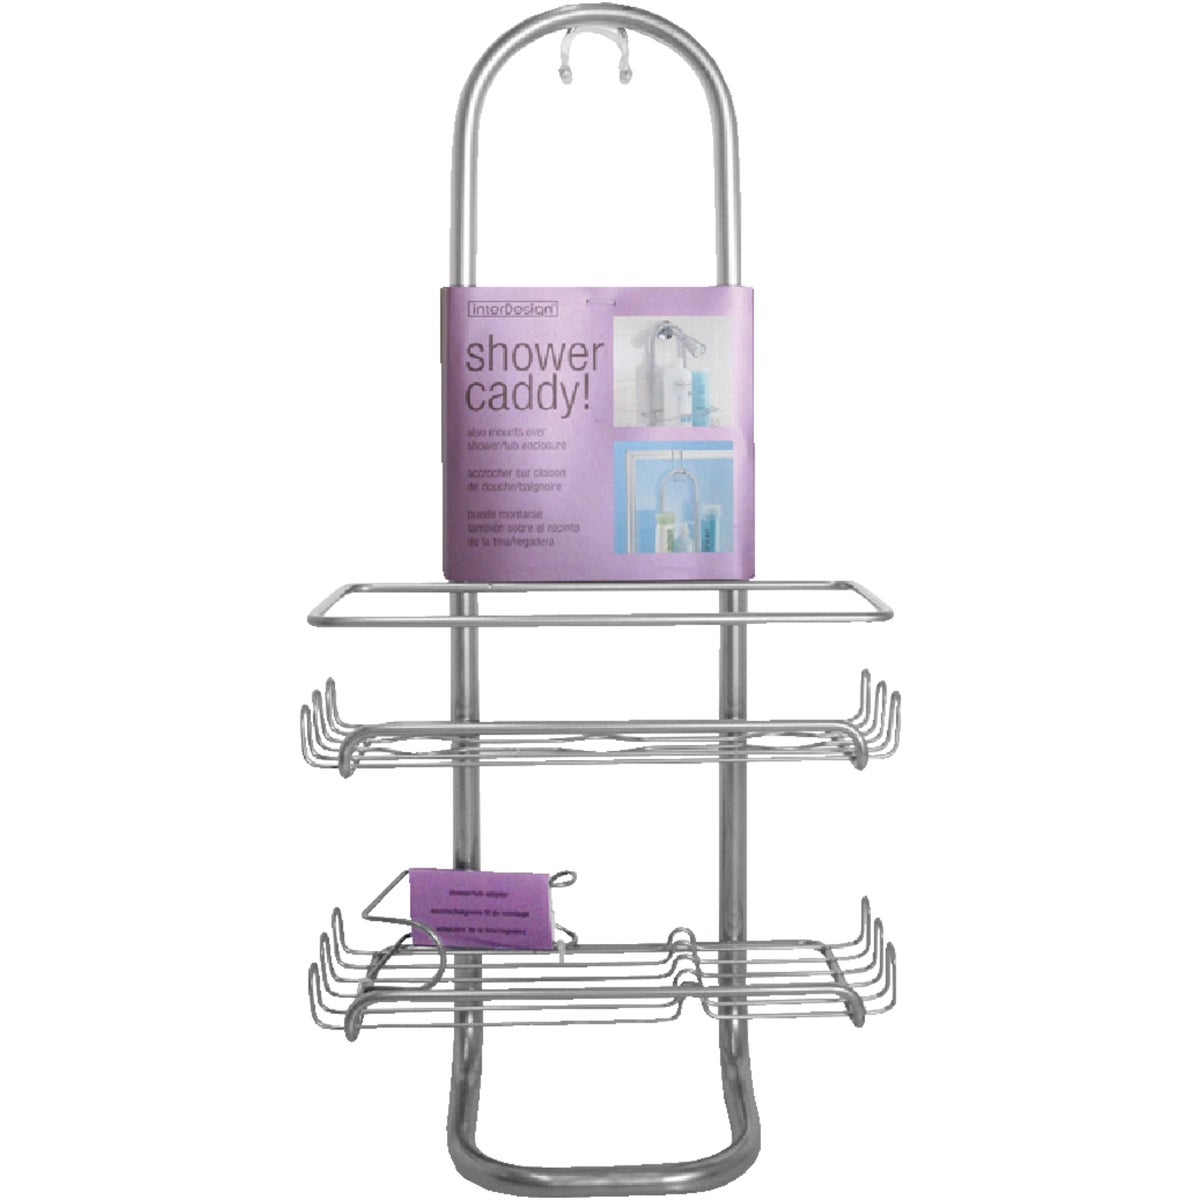 Item 626821, 2 shelves with wire loop design on end to hold razors, scrubbies, and more